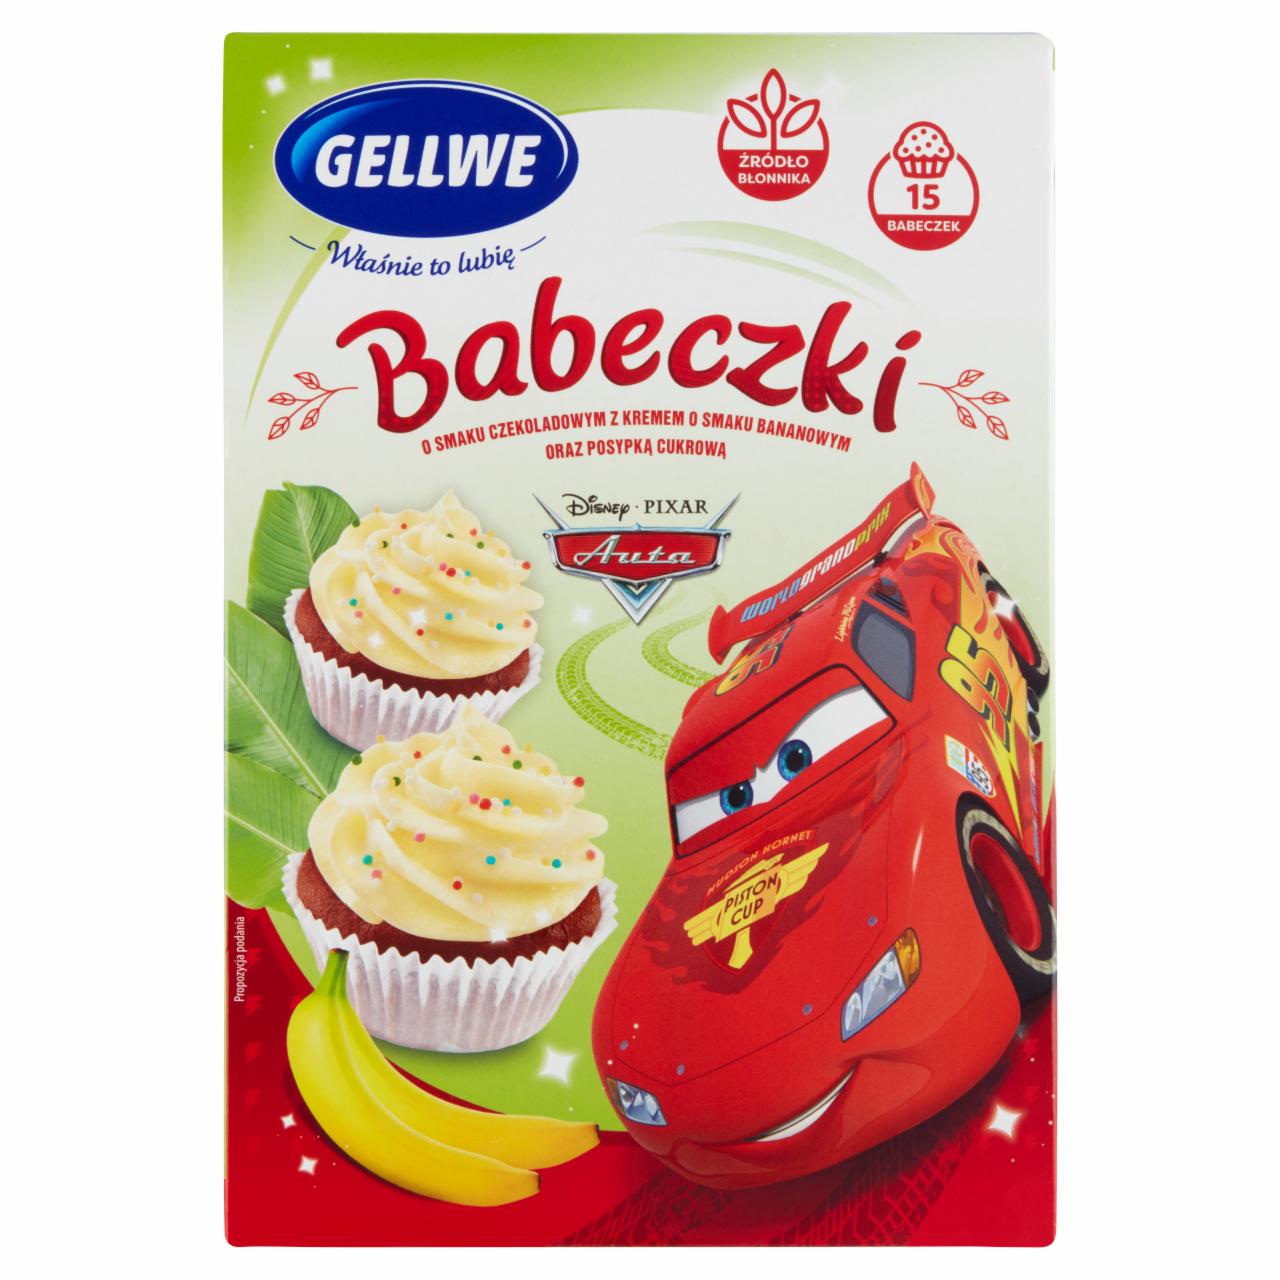 Photo - Gellwe Cars Chocolate Flavoured with Banana Cream and Sprinkles Cupcakes 234 g